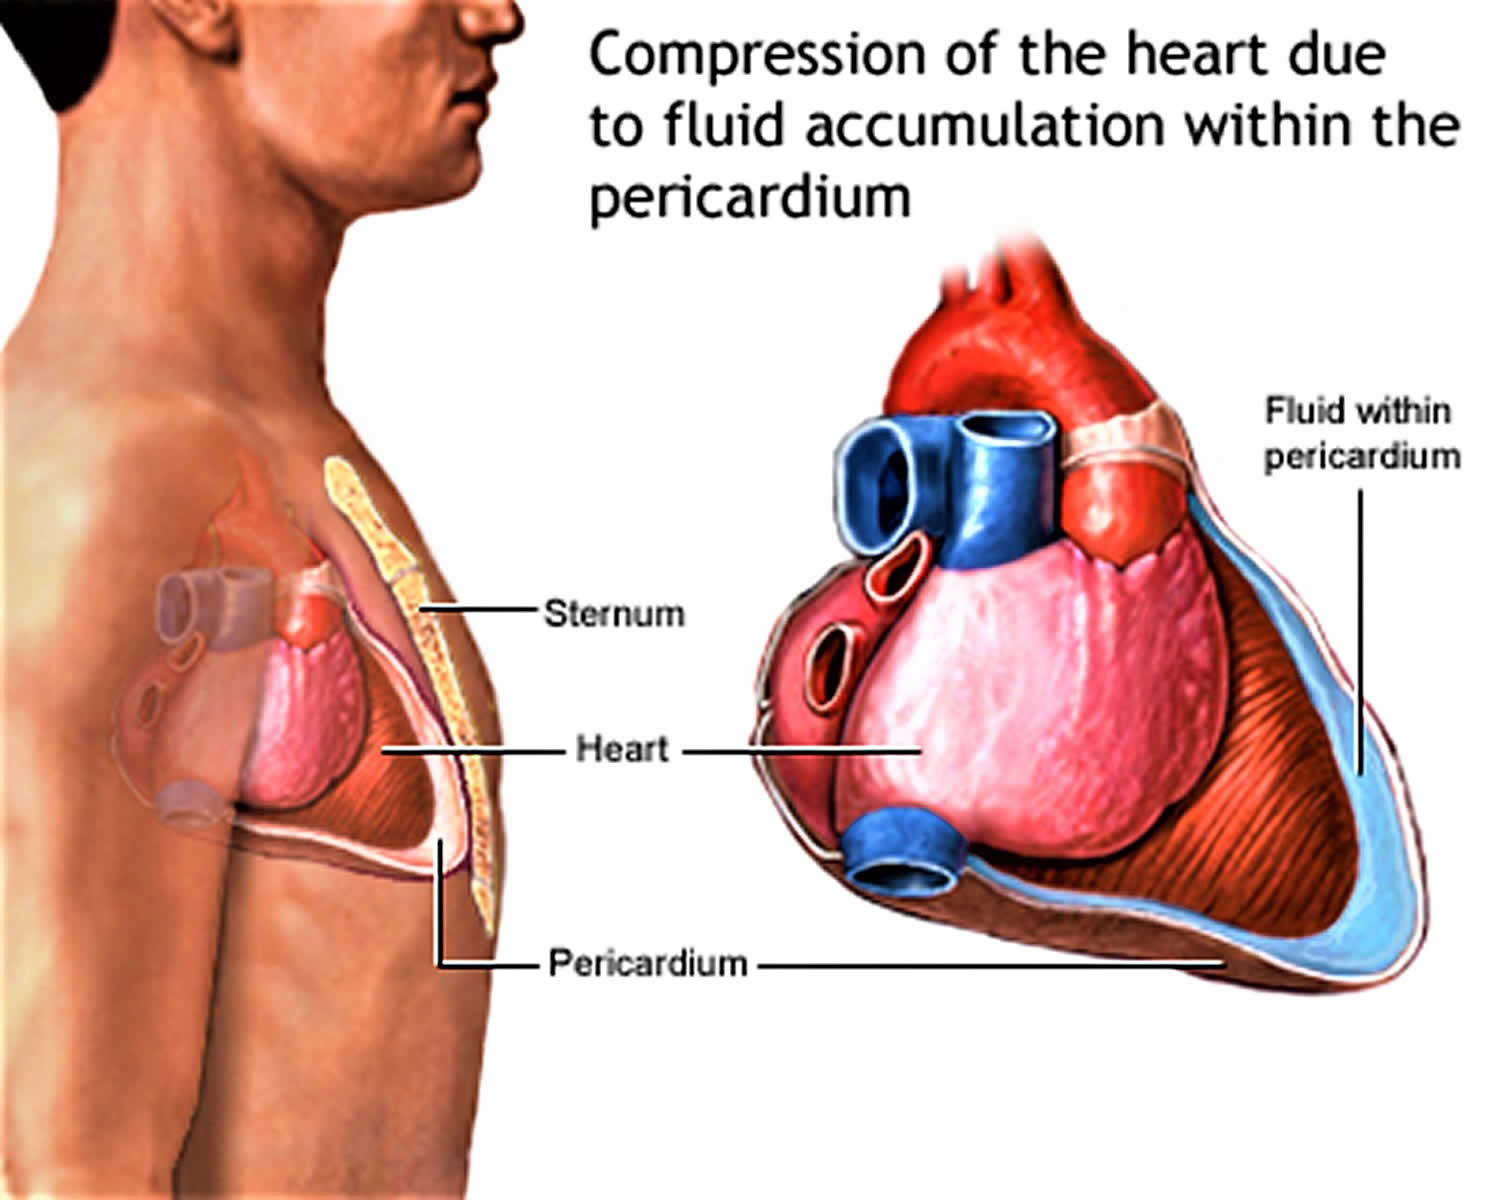 cardiac-tamponade-causes-signs-symptoms-diagnosis-and-treatment